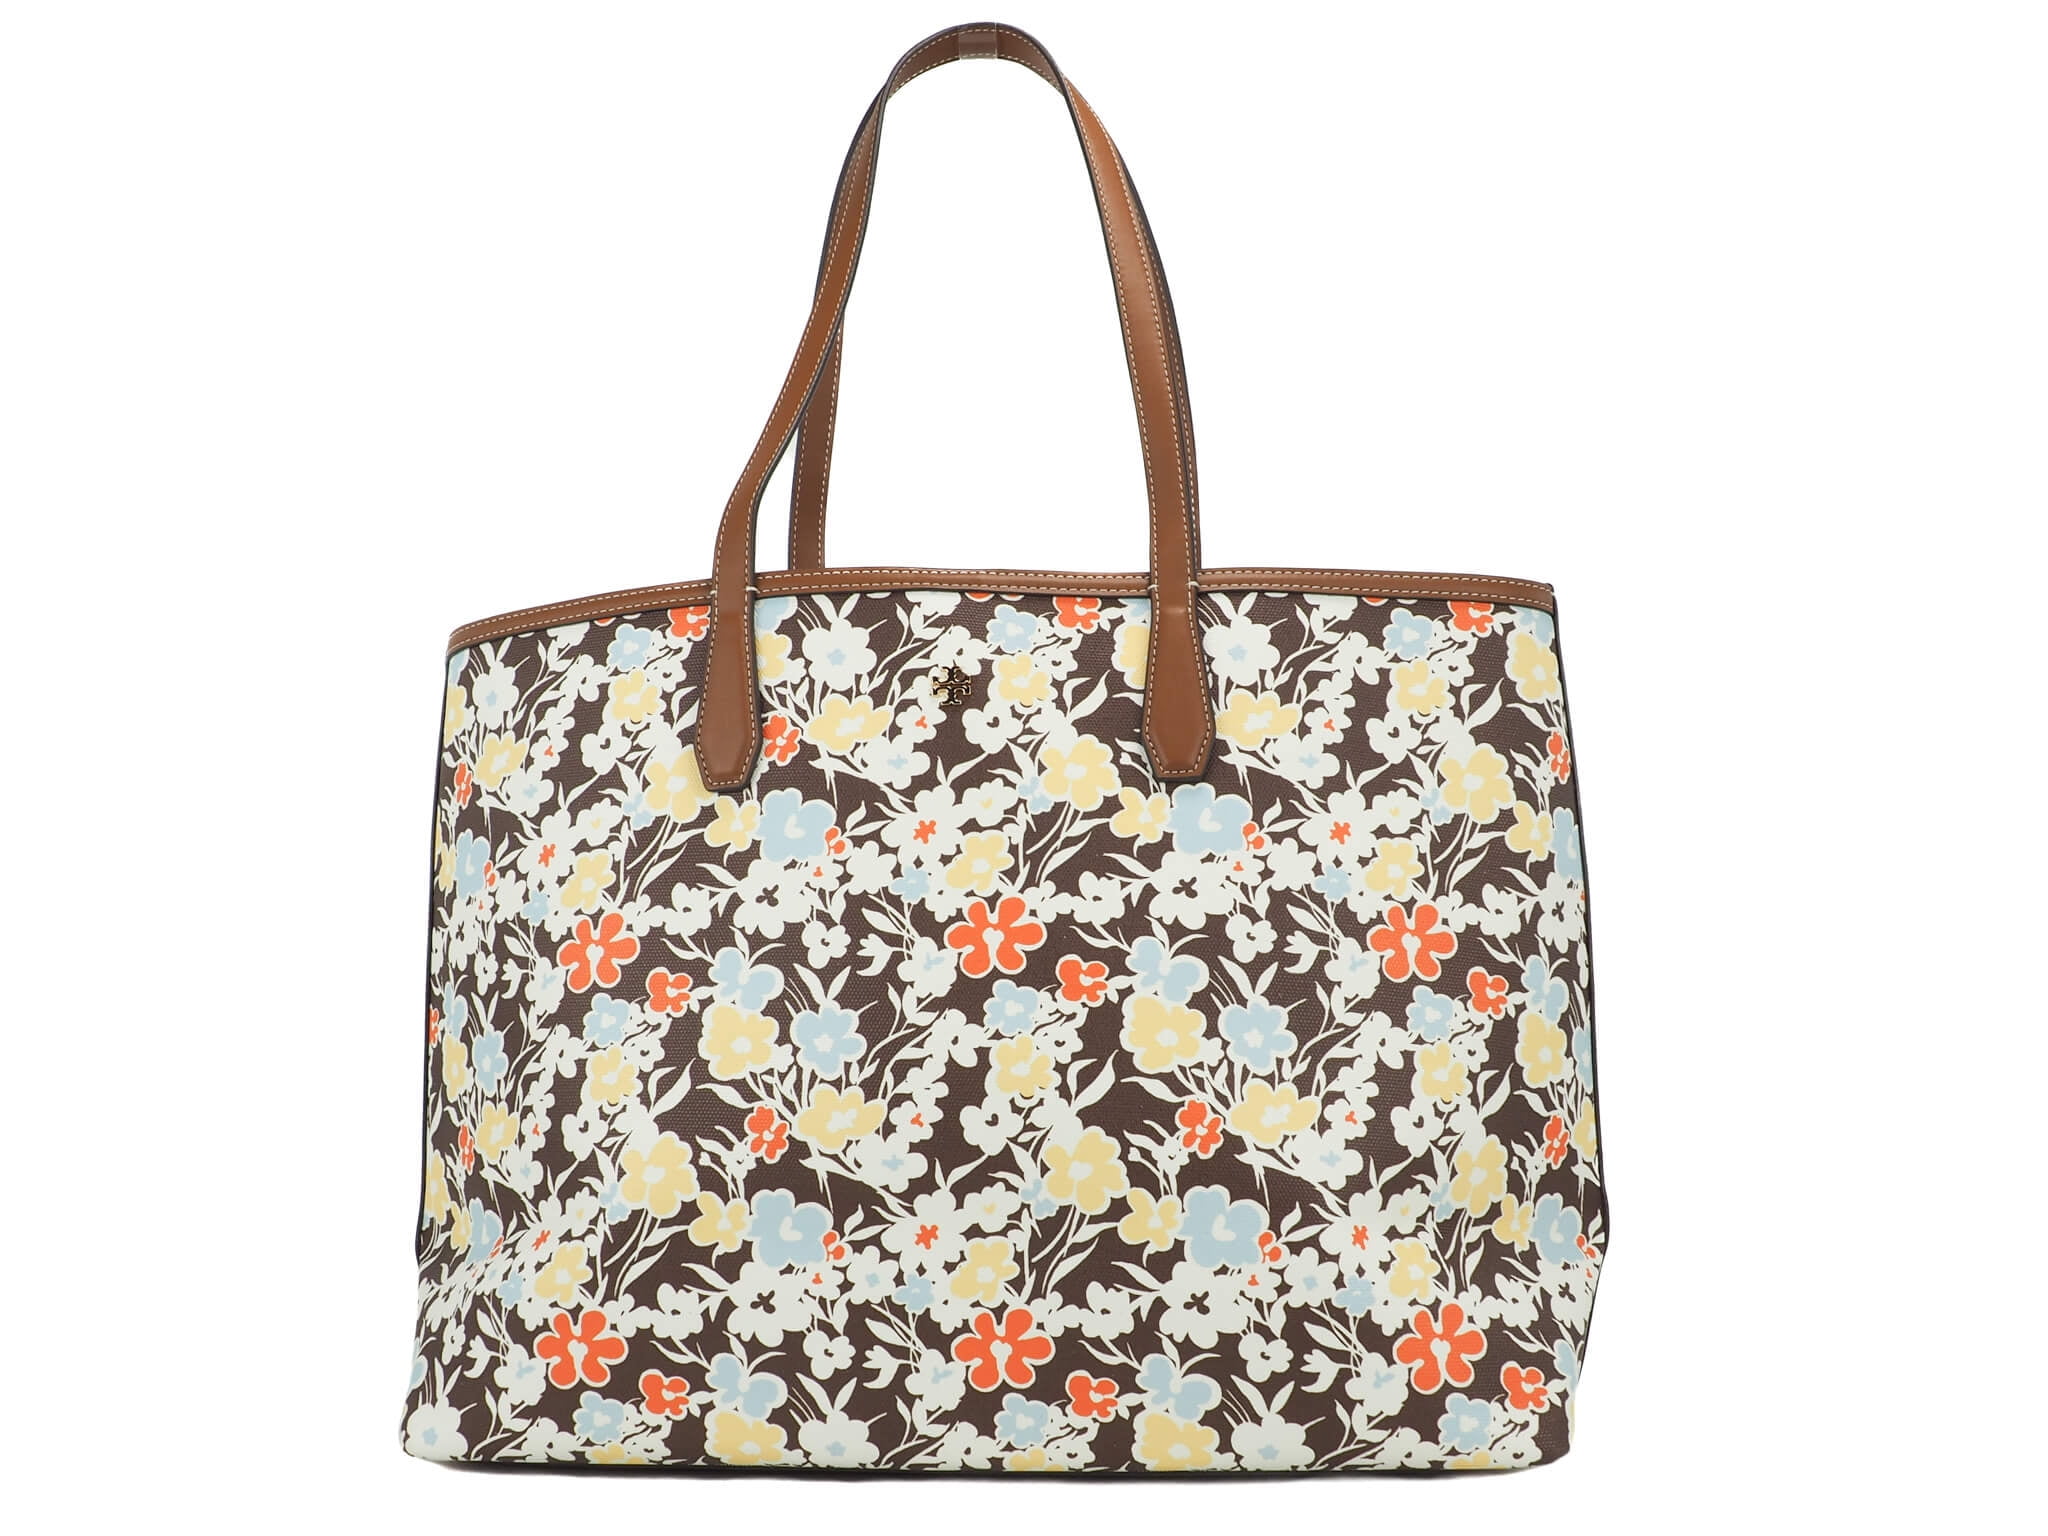 The 'REVERIE' Tote